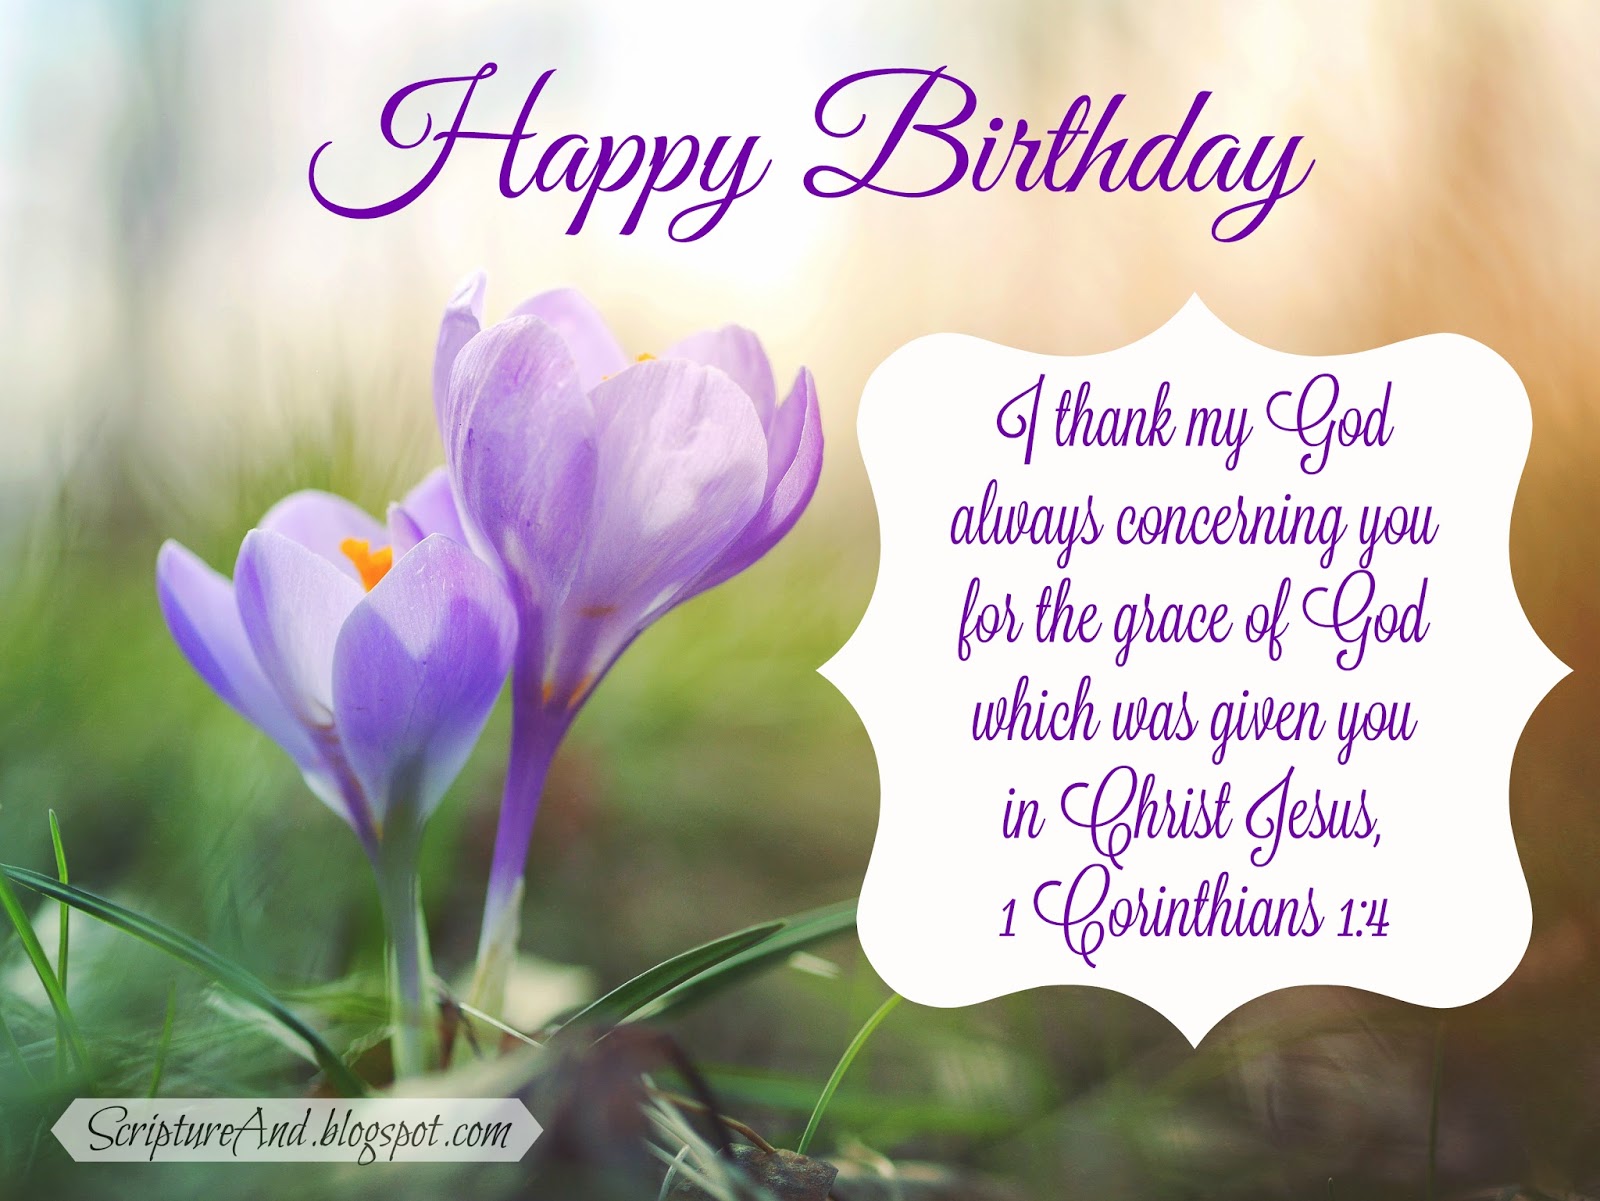 Scripture and ... : Free Birthday Images with Bible Verses